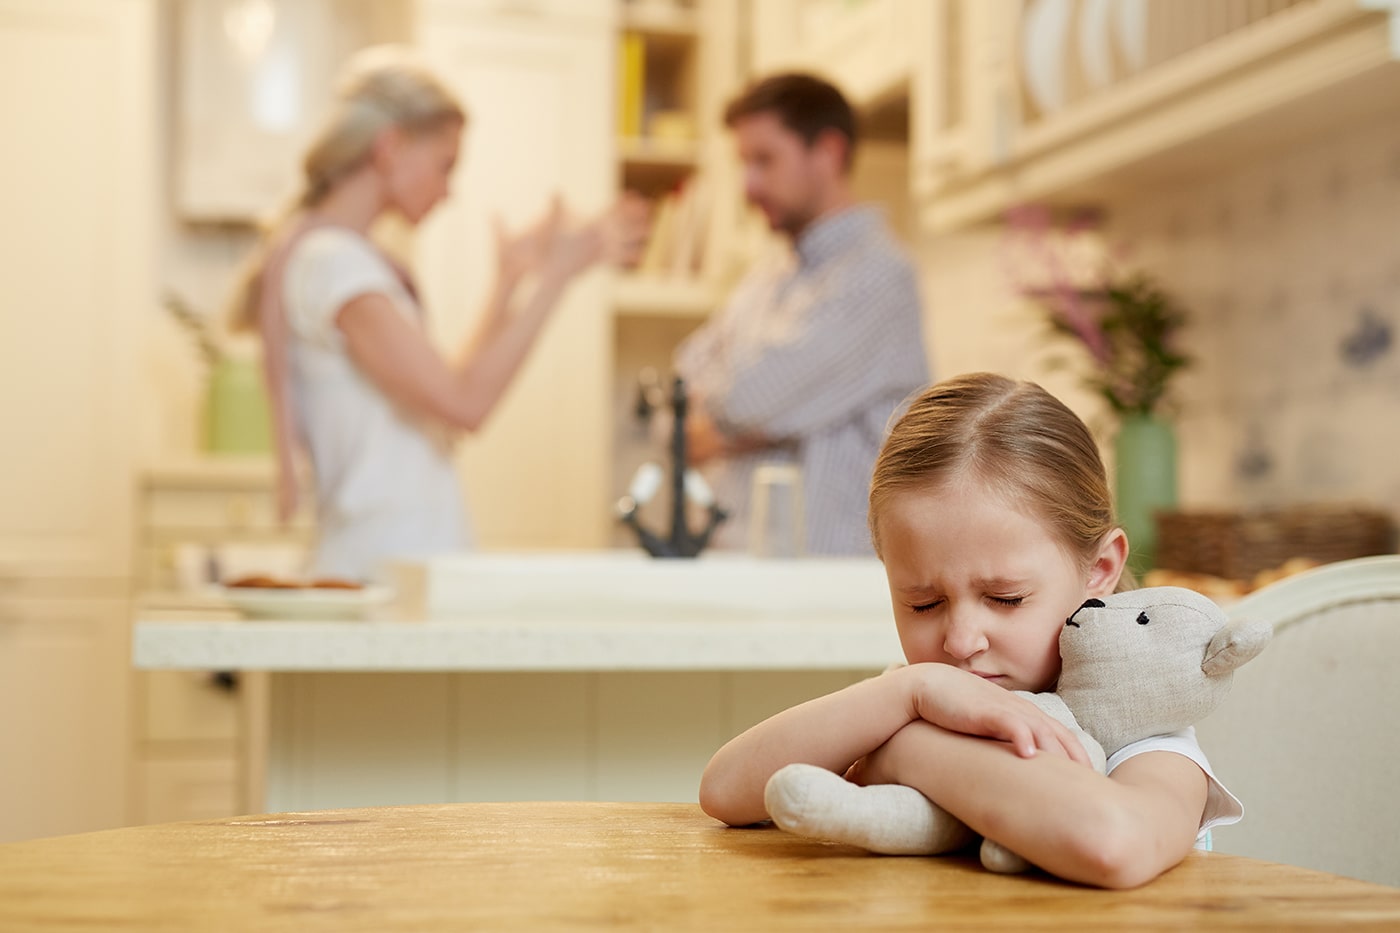 Worried child with parents arguing in background